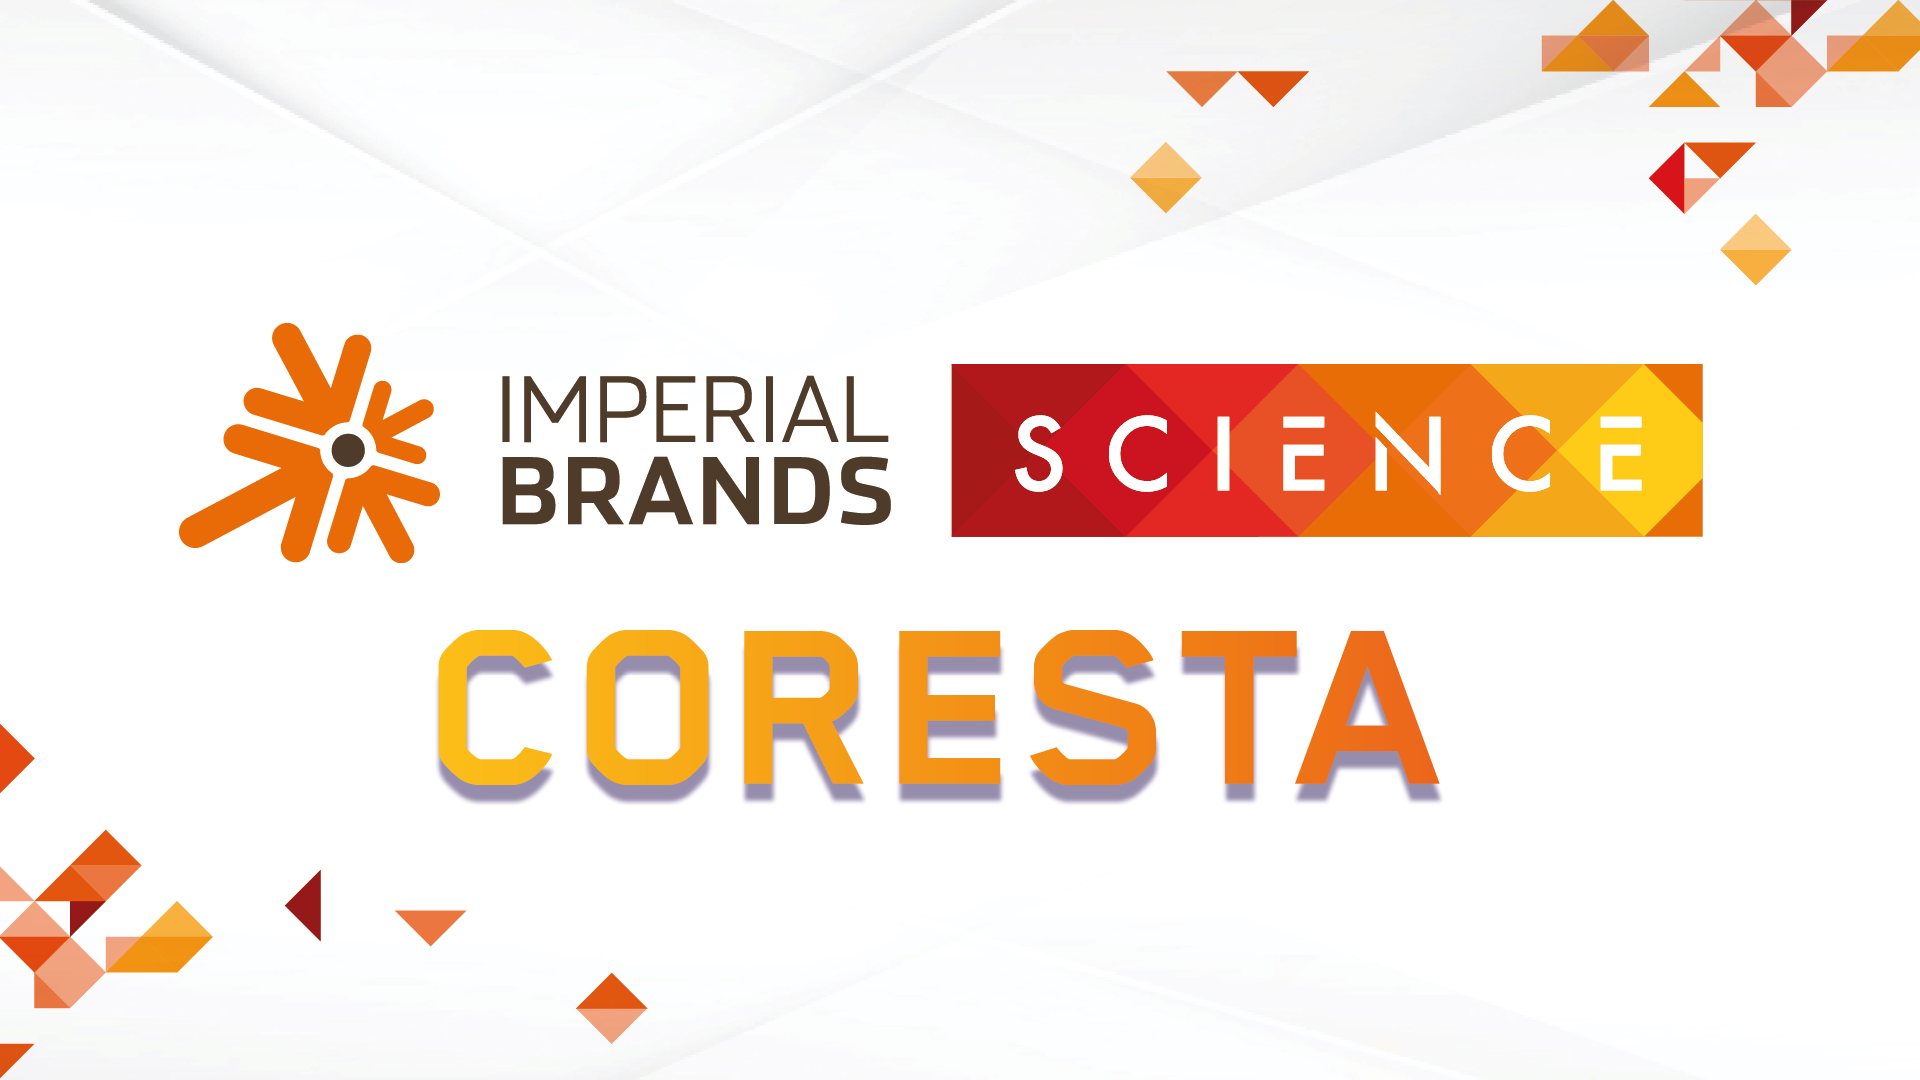 CORESTA APPOINTMENTS FOR IMPERIAL BRANDS